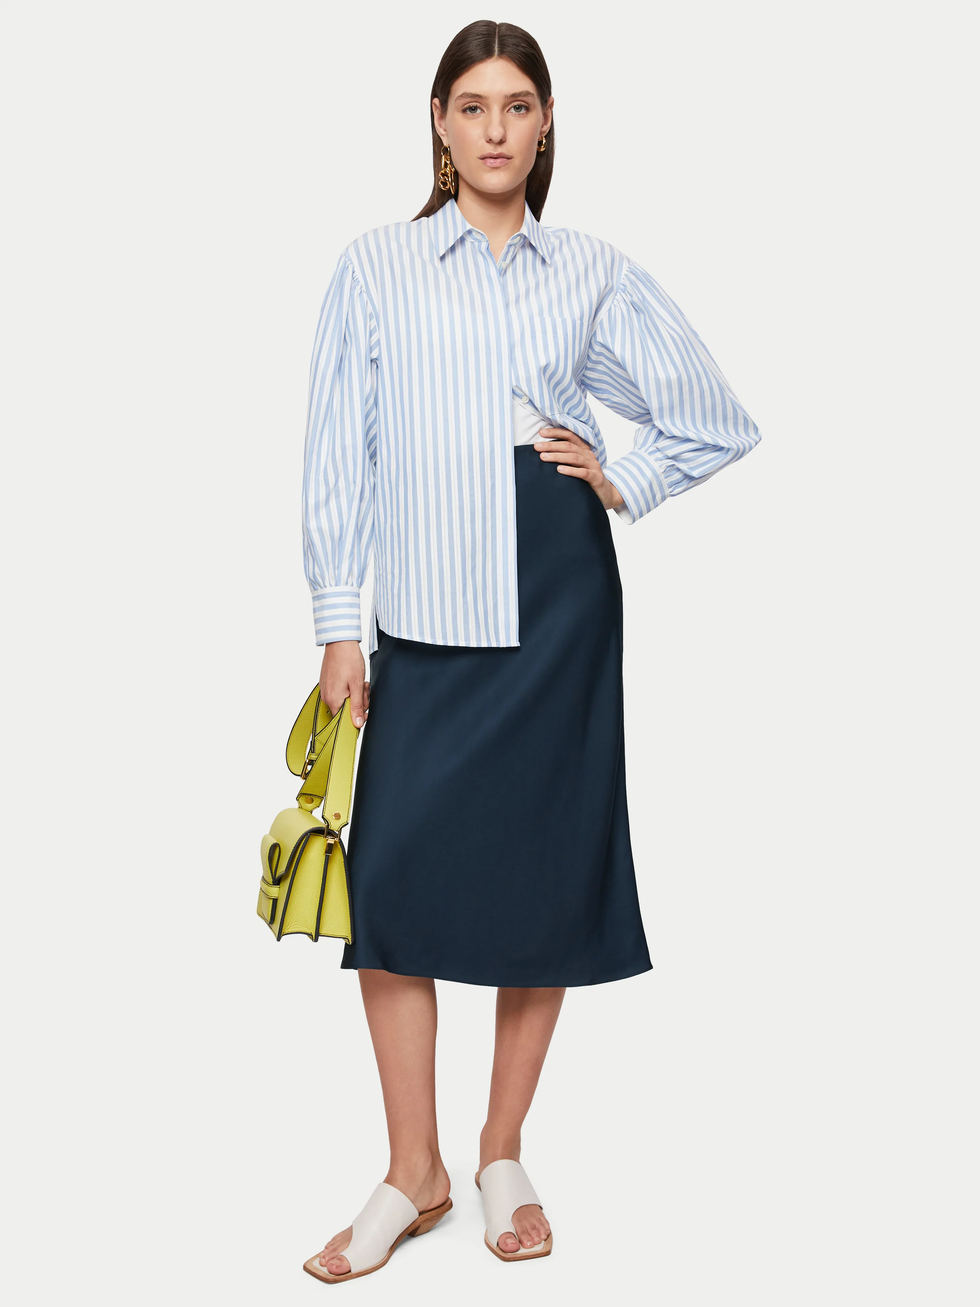 Summer skirts: 11 skirt styles to suit every shape